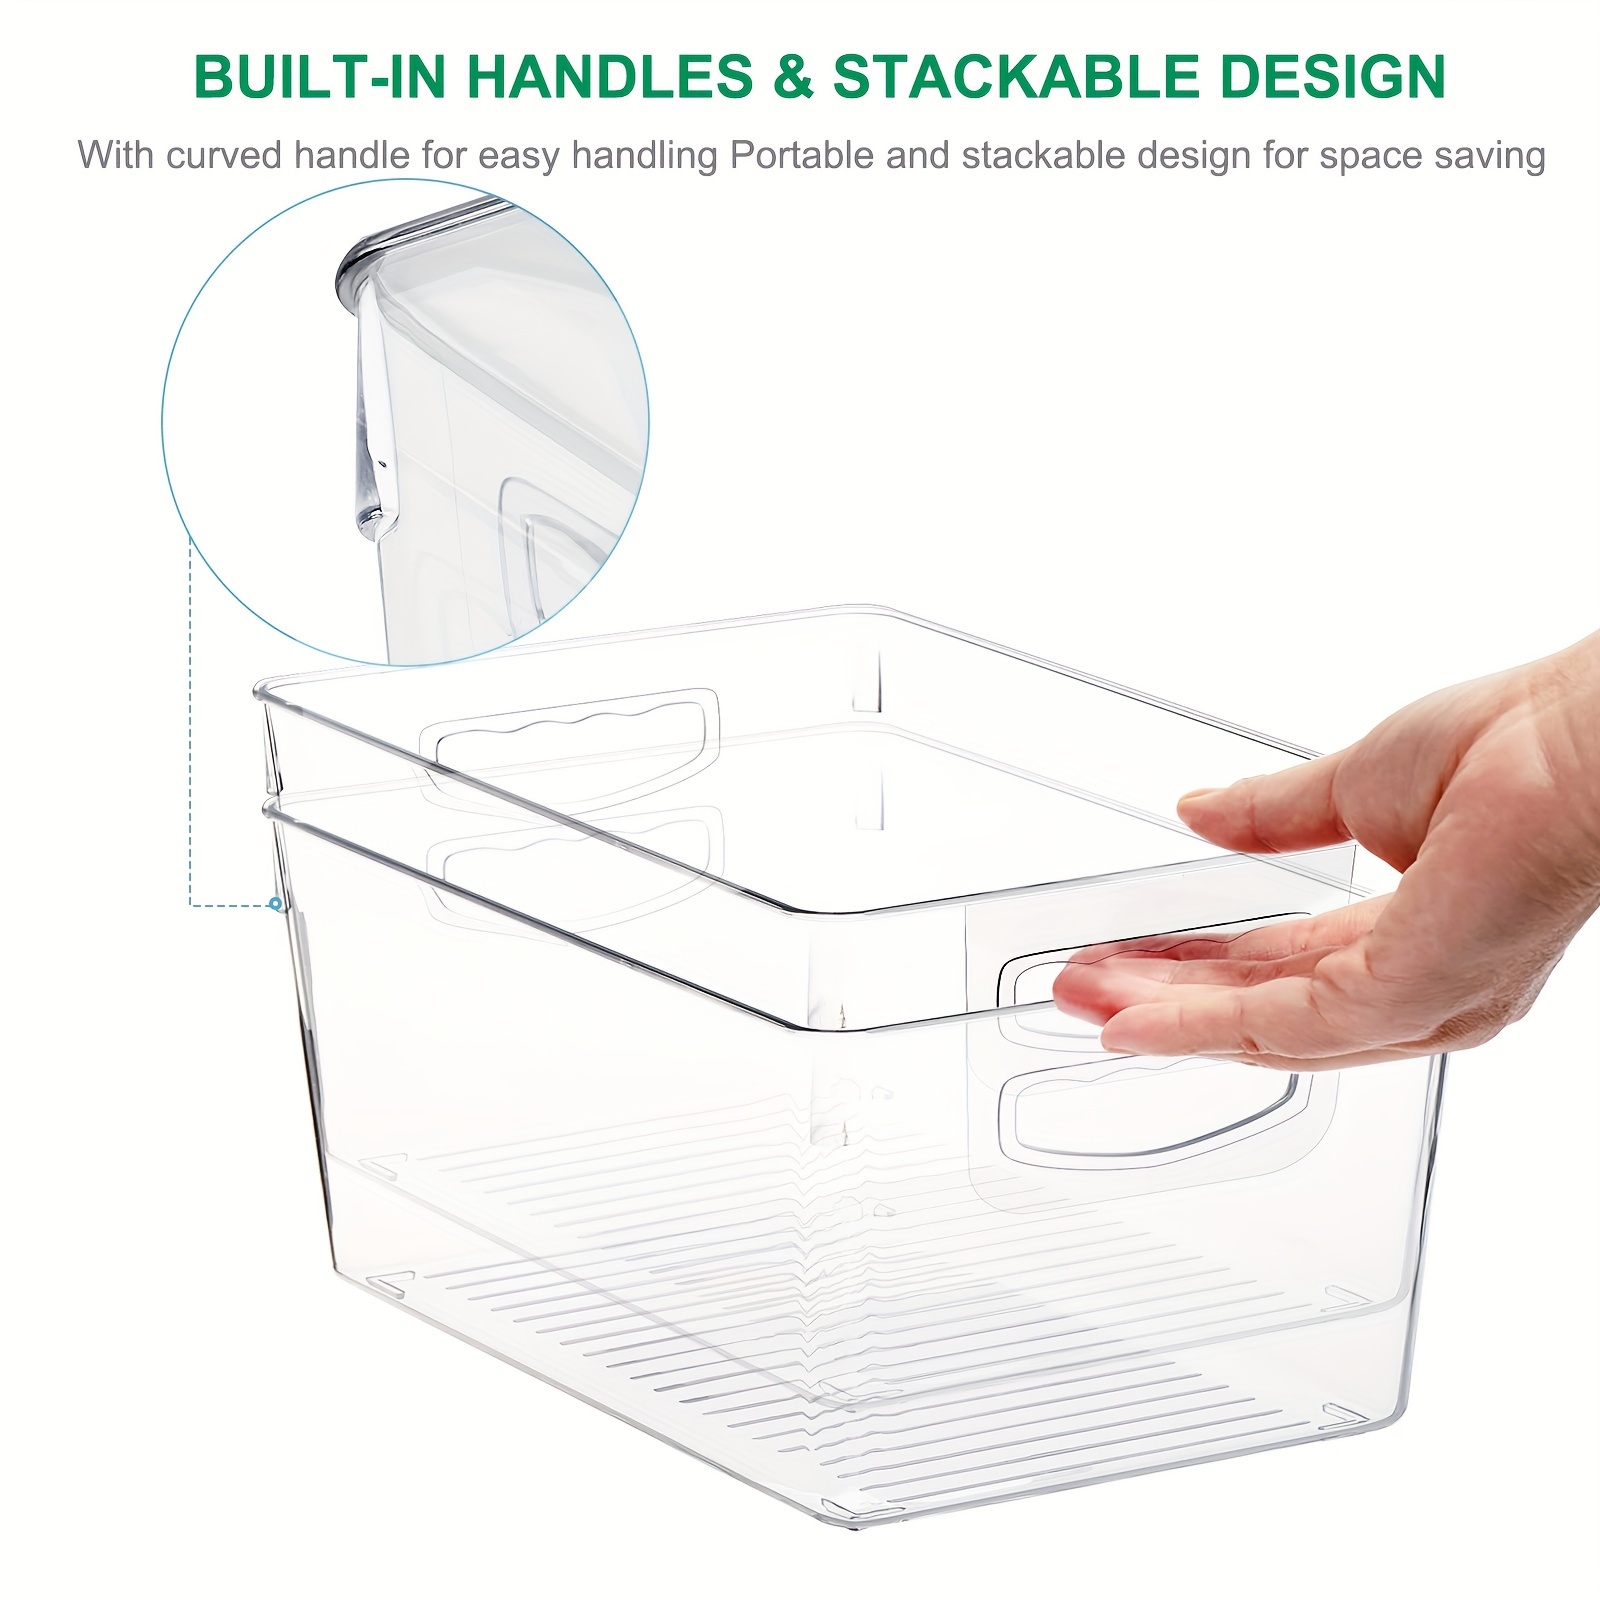 8pcs Storage & Organization, Plastic Refrigerator Organizer Bins, 4pcs  Small And 4pcs Large Clear Storage Containers With Handle, Stackable Food  Stora